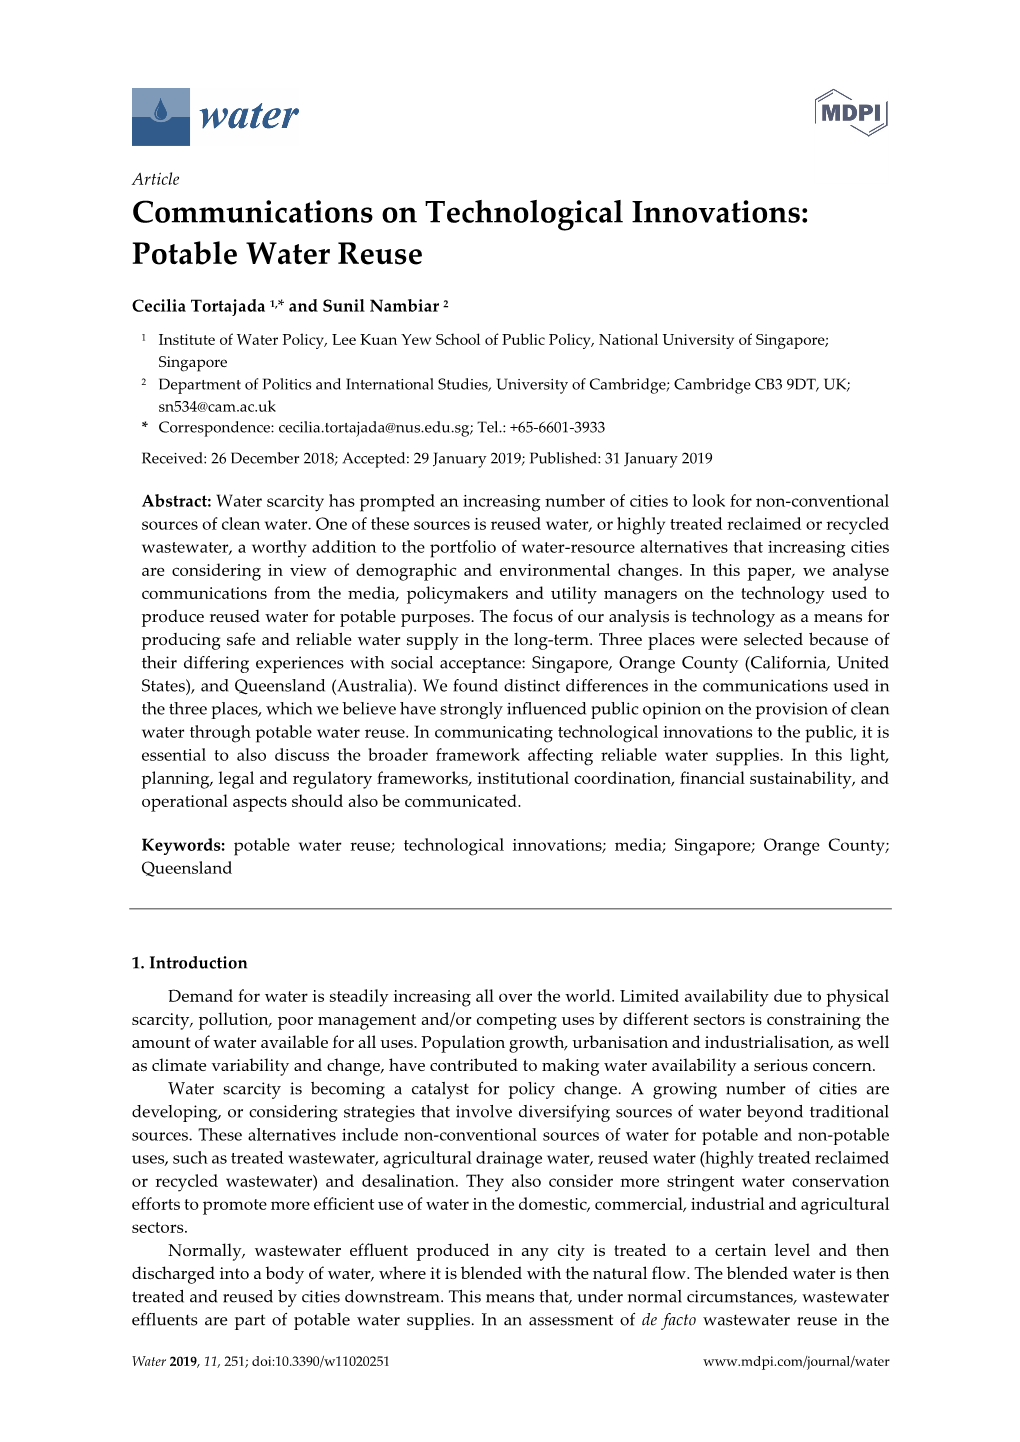 Communications on Technological Innovations: Potable Water Reuse